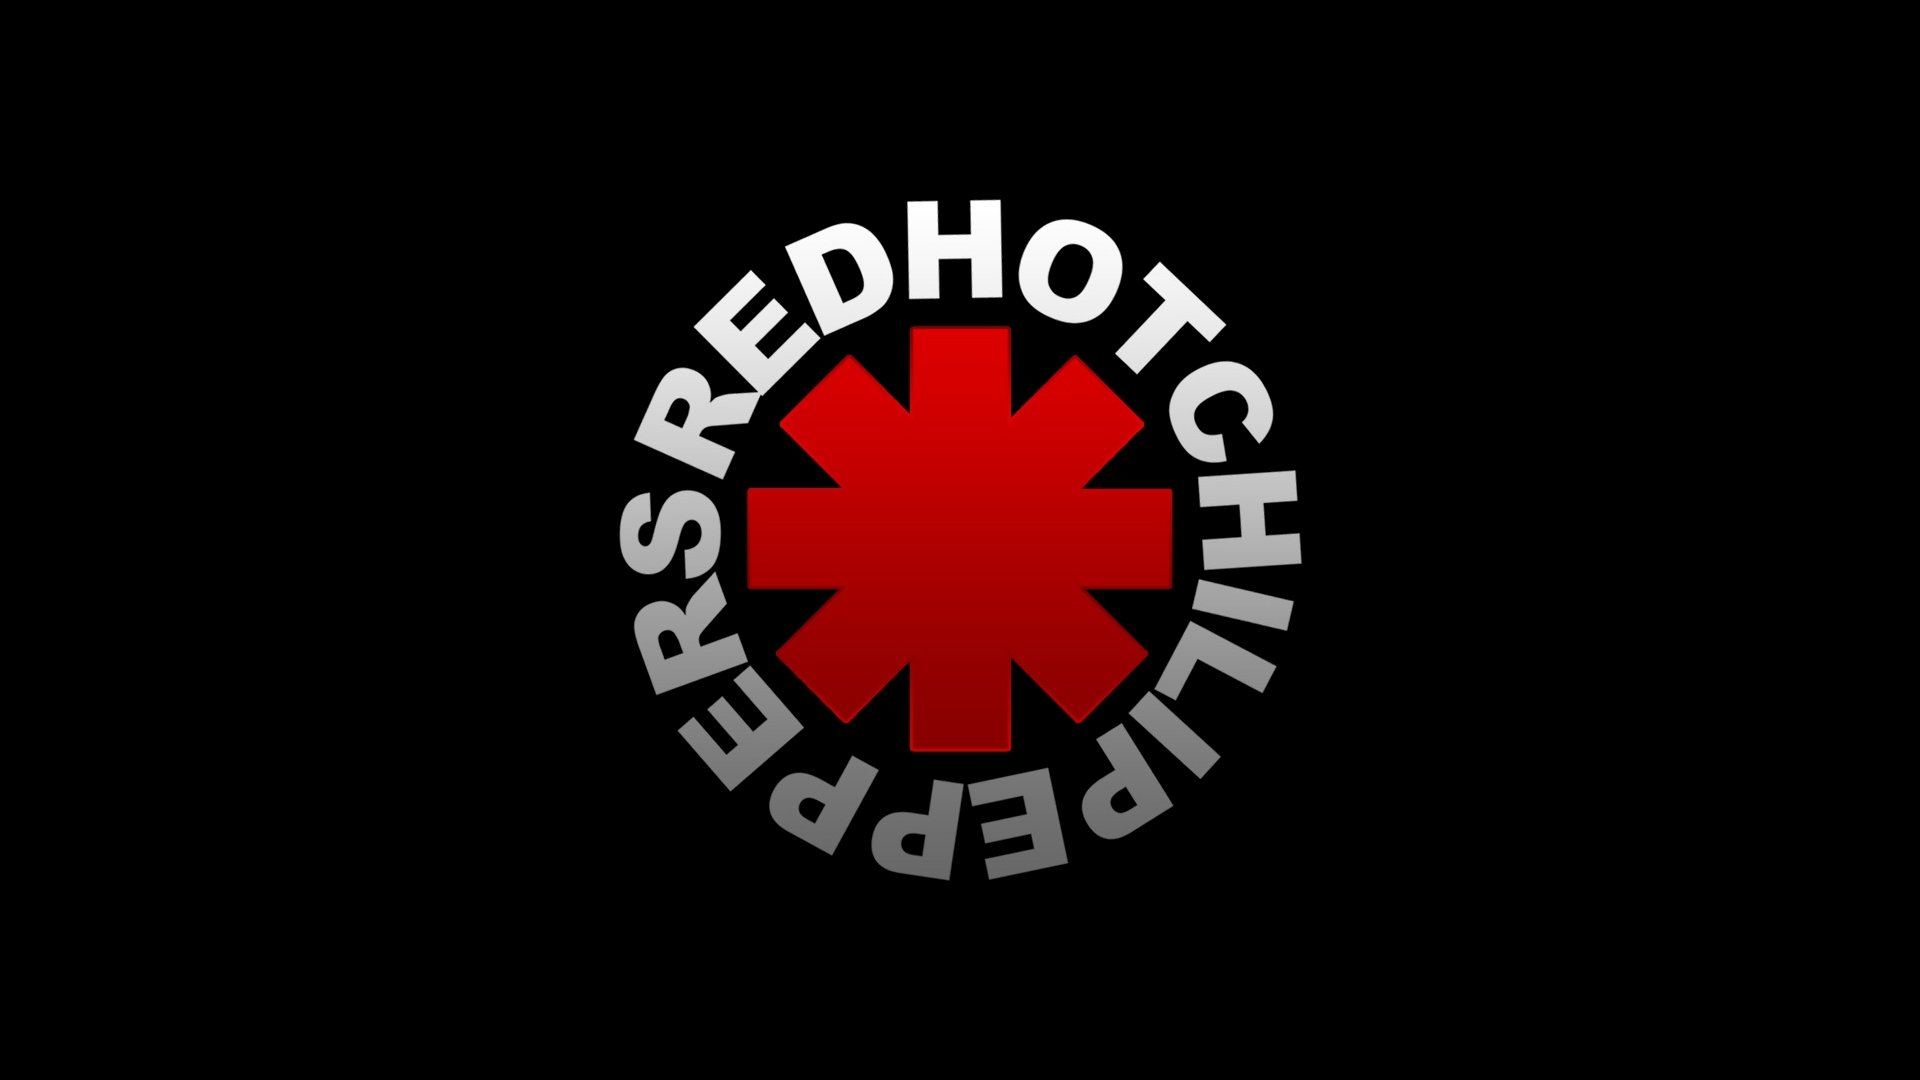 Red hot chili peppers dark. Red hot Chili Peppers логотип группы. Red hot Chili Peppers знак. Ред хот Чили пеперс эмблема. RHCP знак.